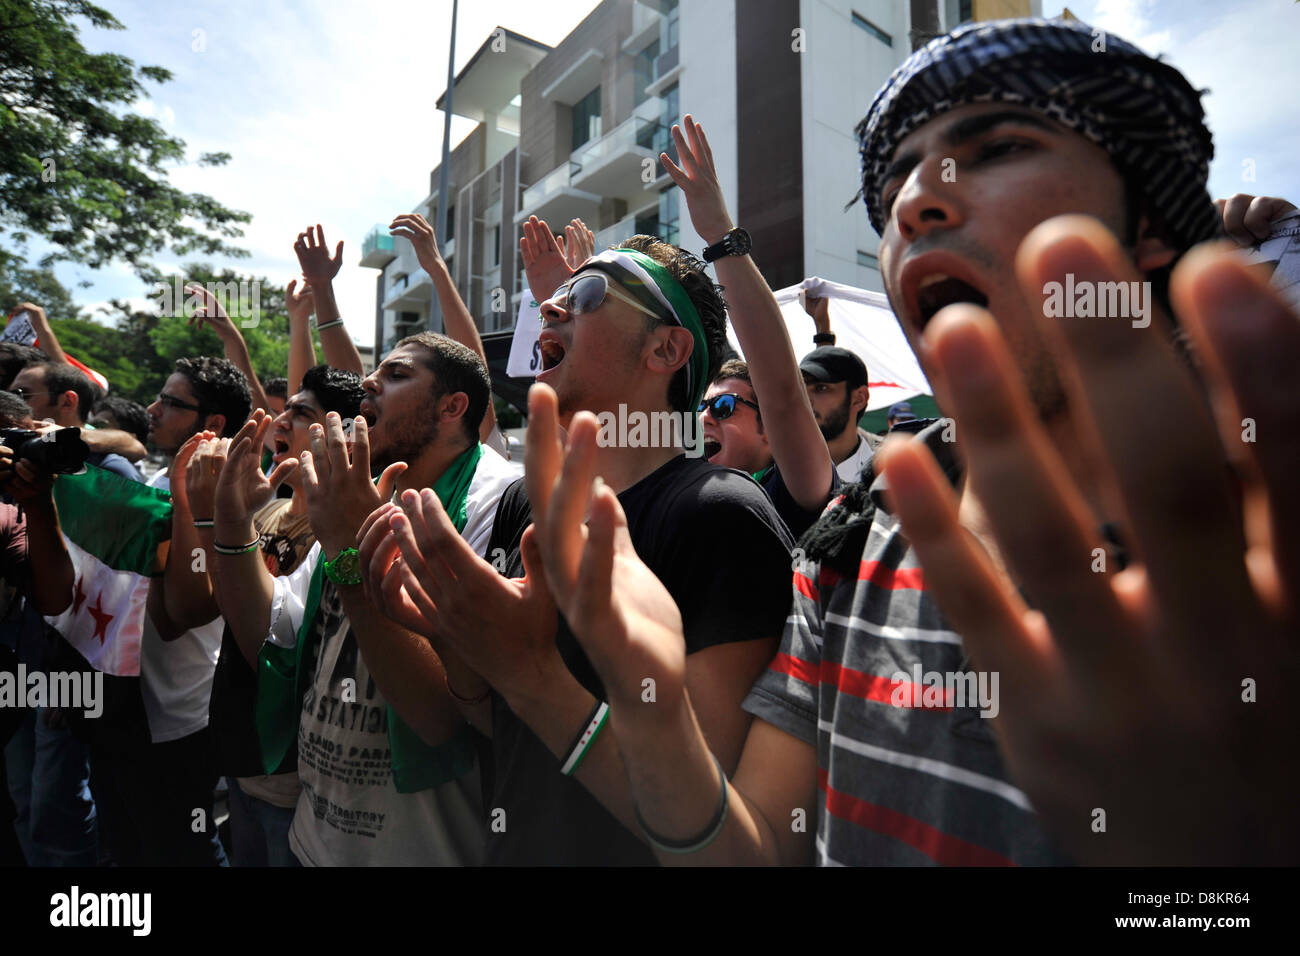 Kuala Lumpur, Malaysia. May 31, 2013. Syrians living in Malaysia pray during a rally against Syria's President Bashar al-Assad and foreign intervention in Syrian crisis, outside the Iran embassy in Kuala Lumpur.  Credit:  ZUMA Press, Inc./Alamy Live News Stock Photo